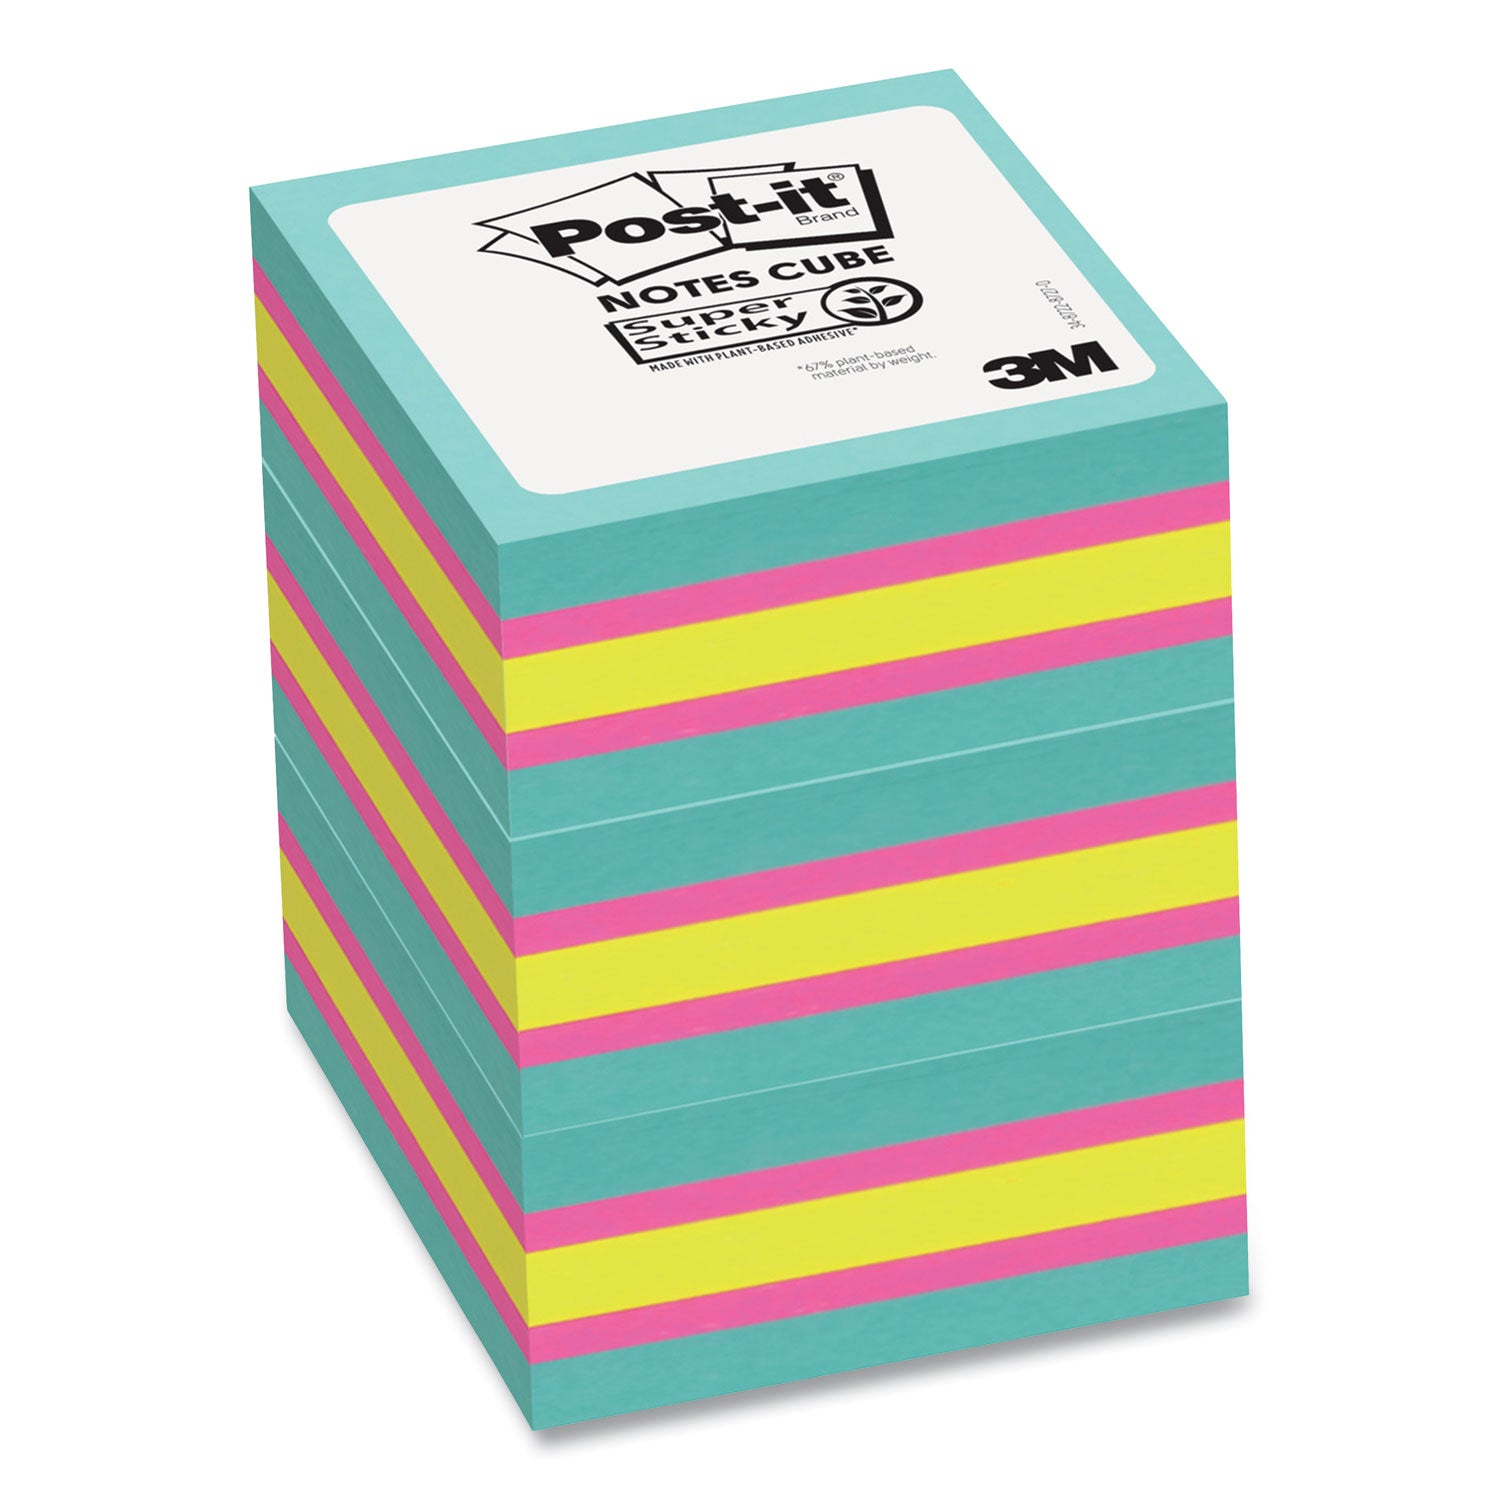 self-stick-notes-cube-3-x-3-bright-color-collection-colors-360-sheets-pad-3-cubes-pack_mmm2027ssafg3pk - 1